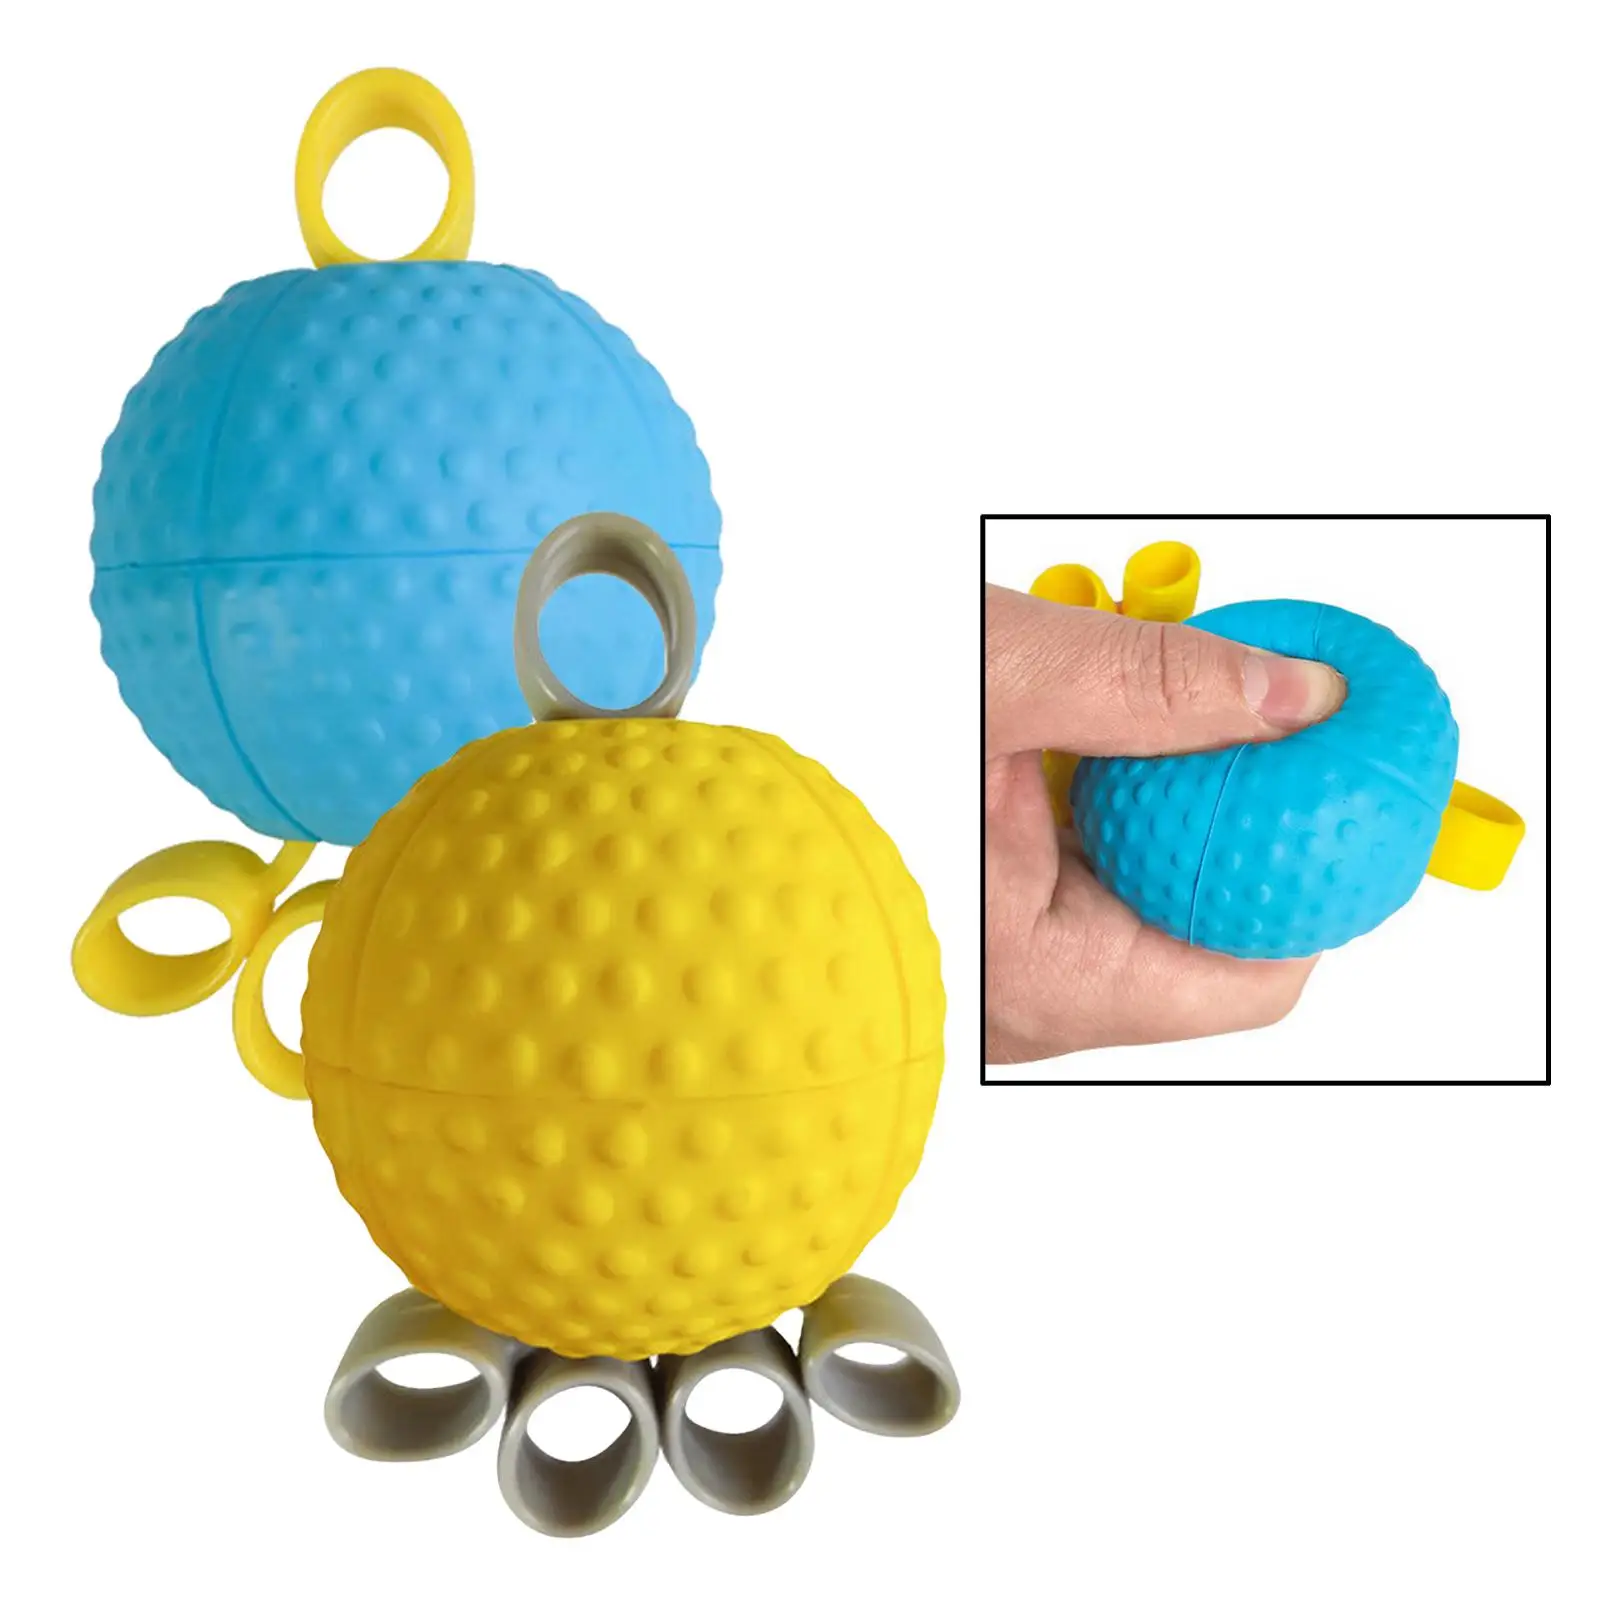 Finger Grip Ball Massage Hand Exerciser Training Equipment Finger Orthosis for Hand Cramps Elderly Therapy Ball Squeeze Ball